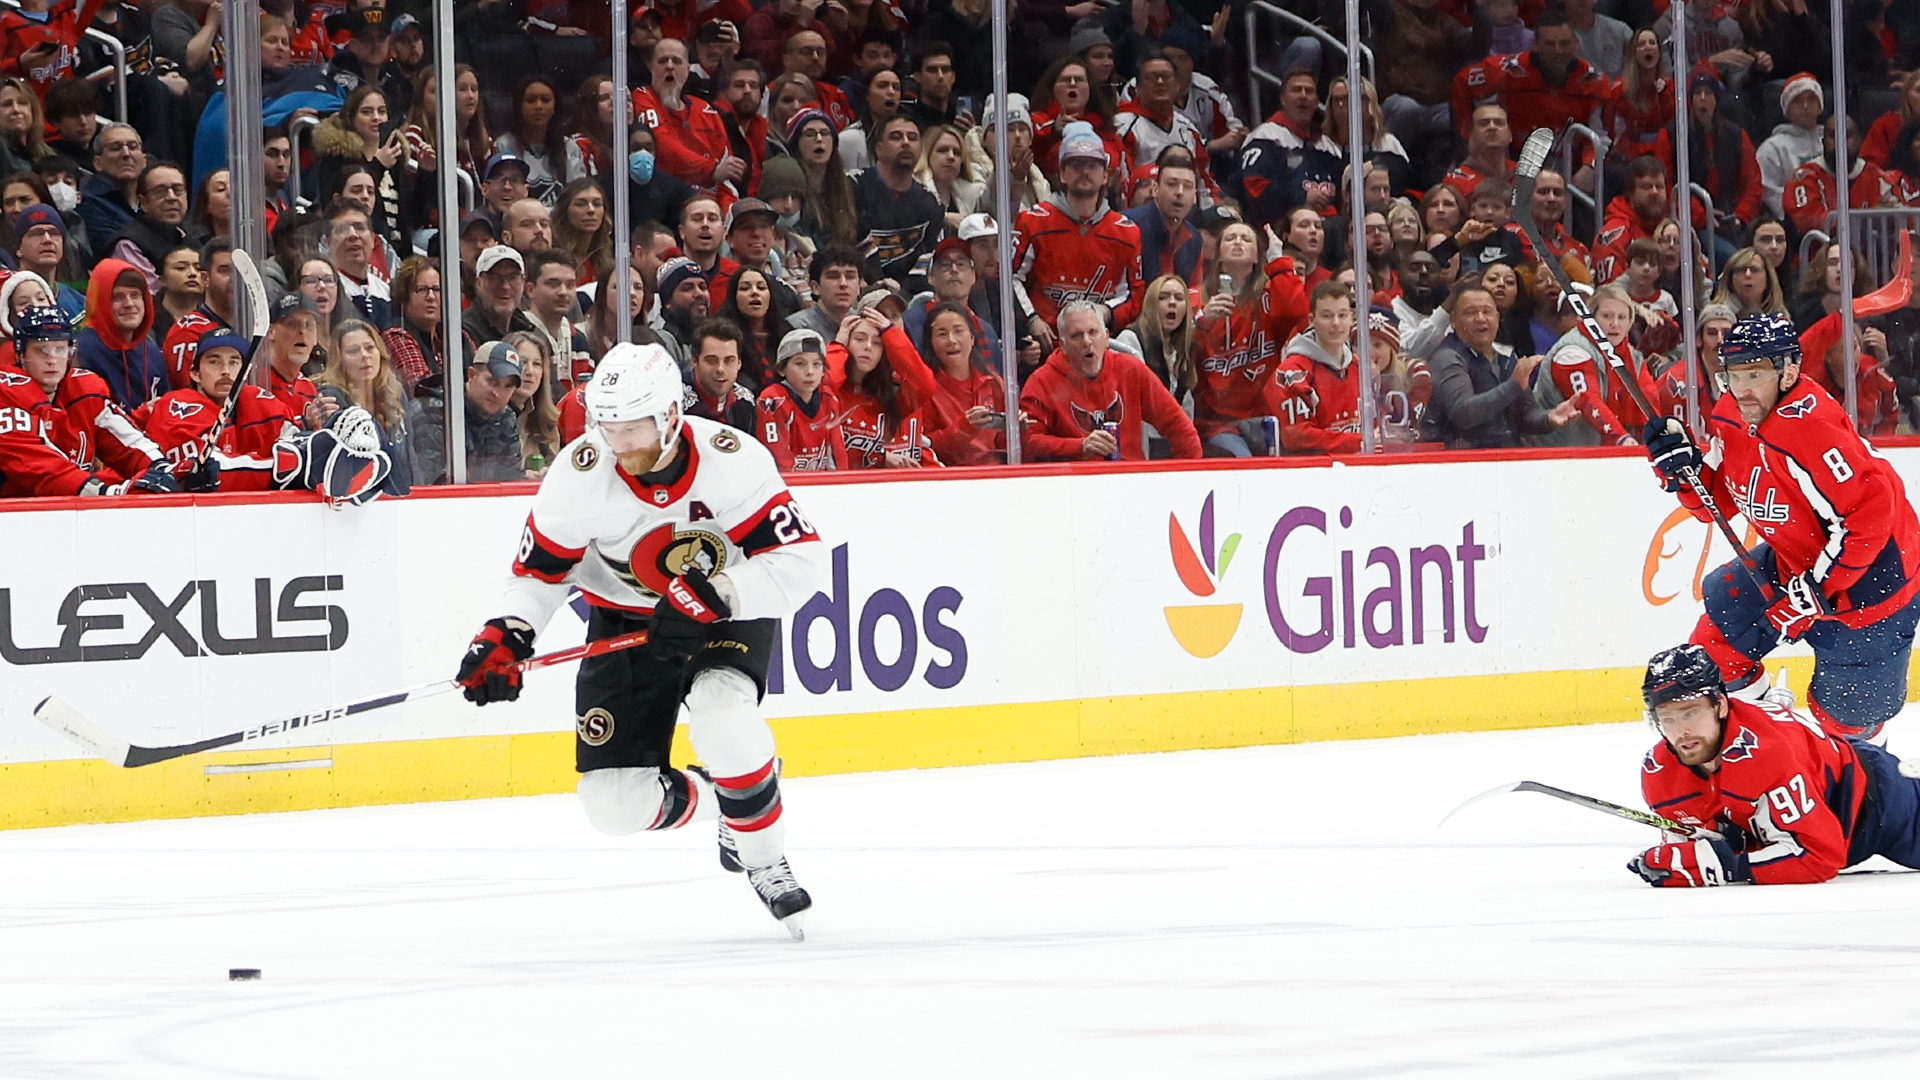 Senators right wing Claude Giroux skates with the puck past Capitals left wing Alex Ovechkin and center Evgeny Kuznetsov in overtime